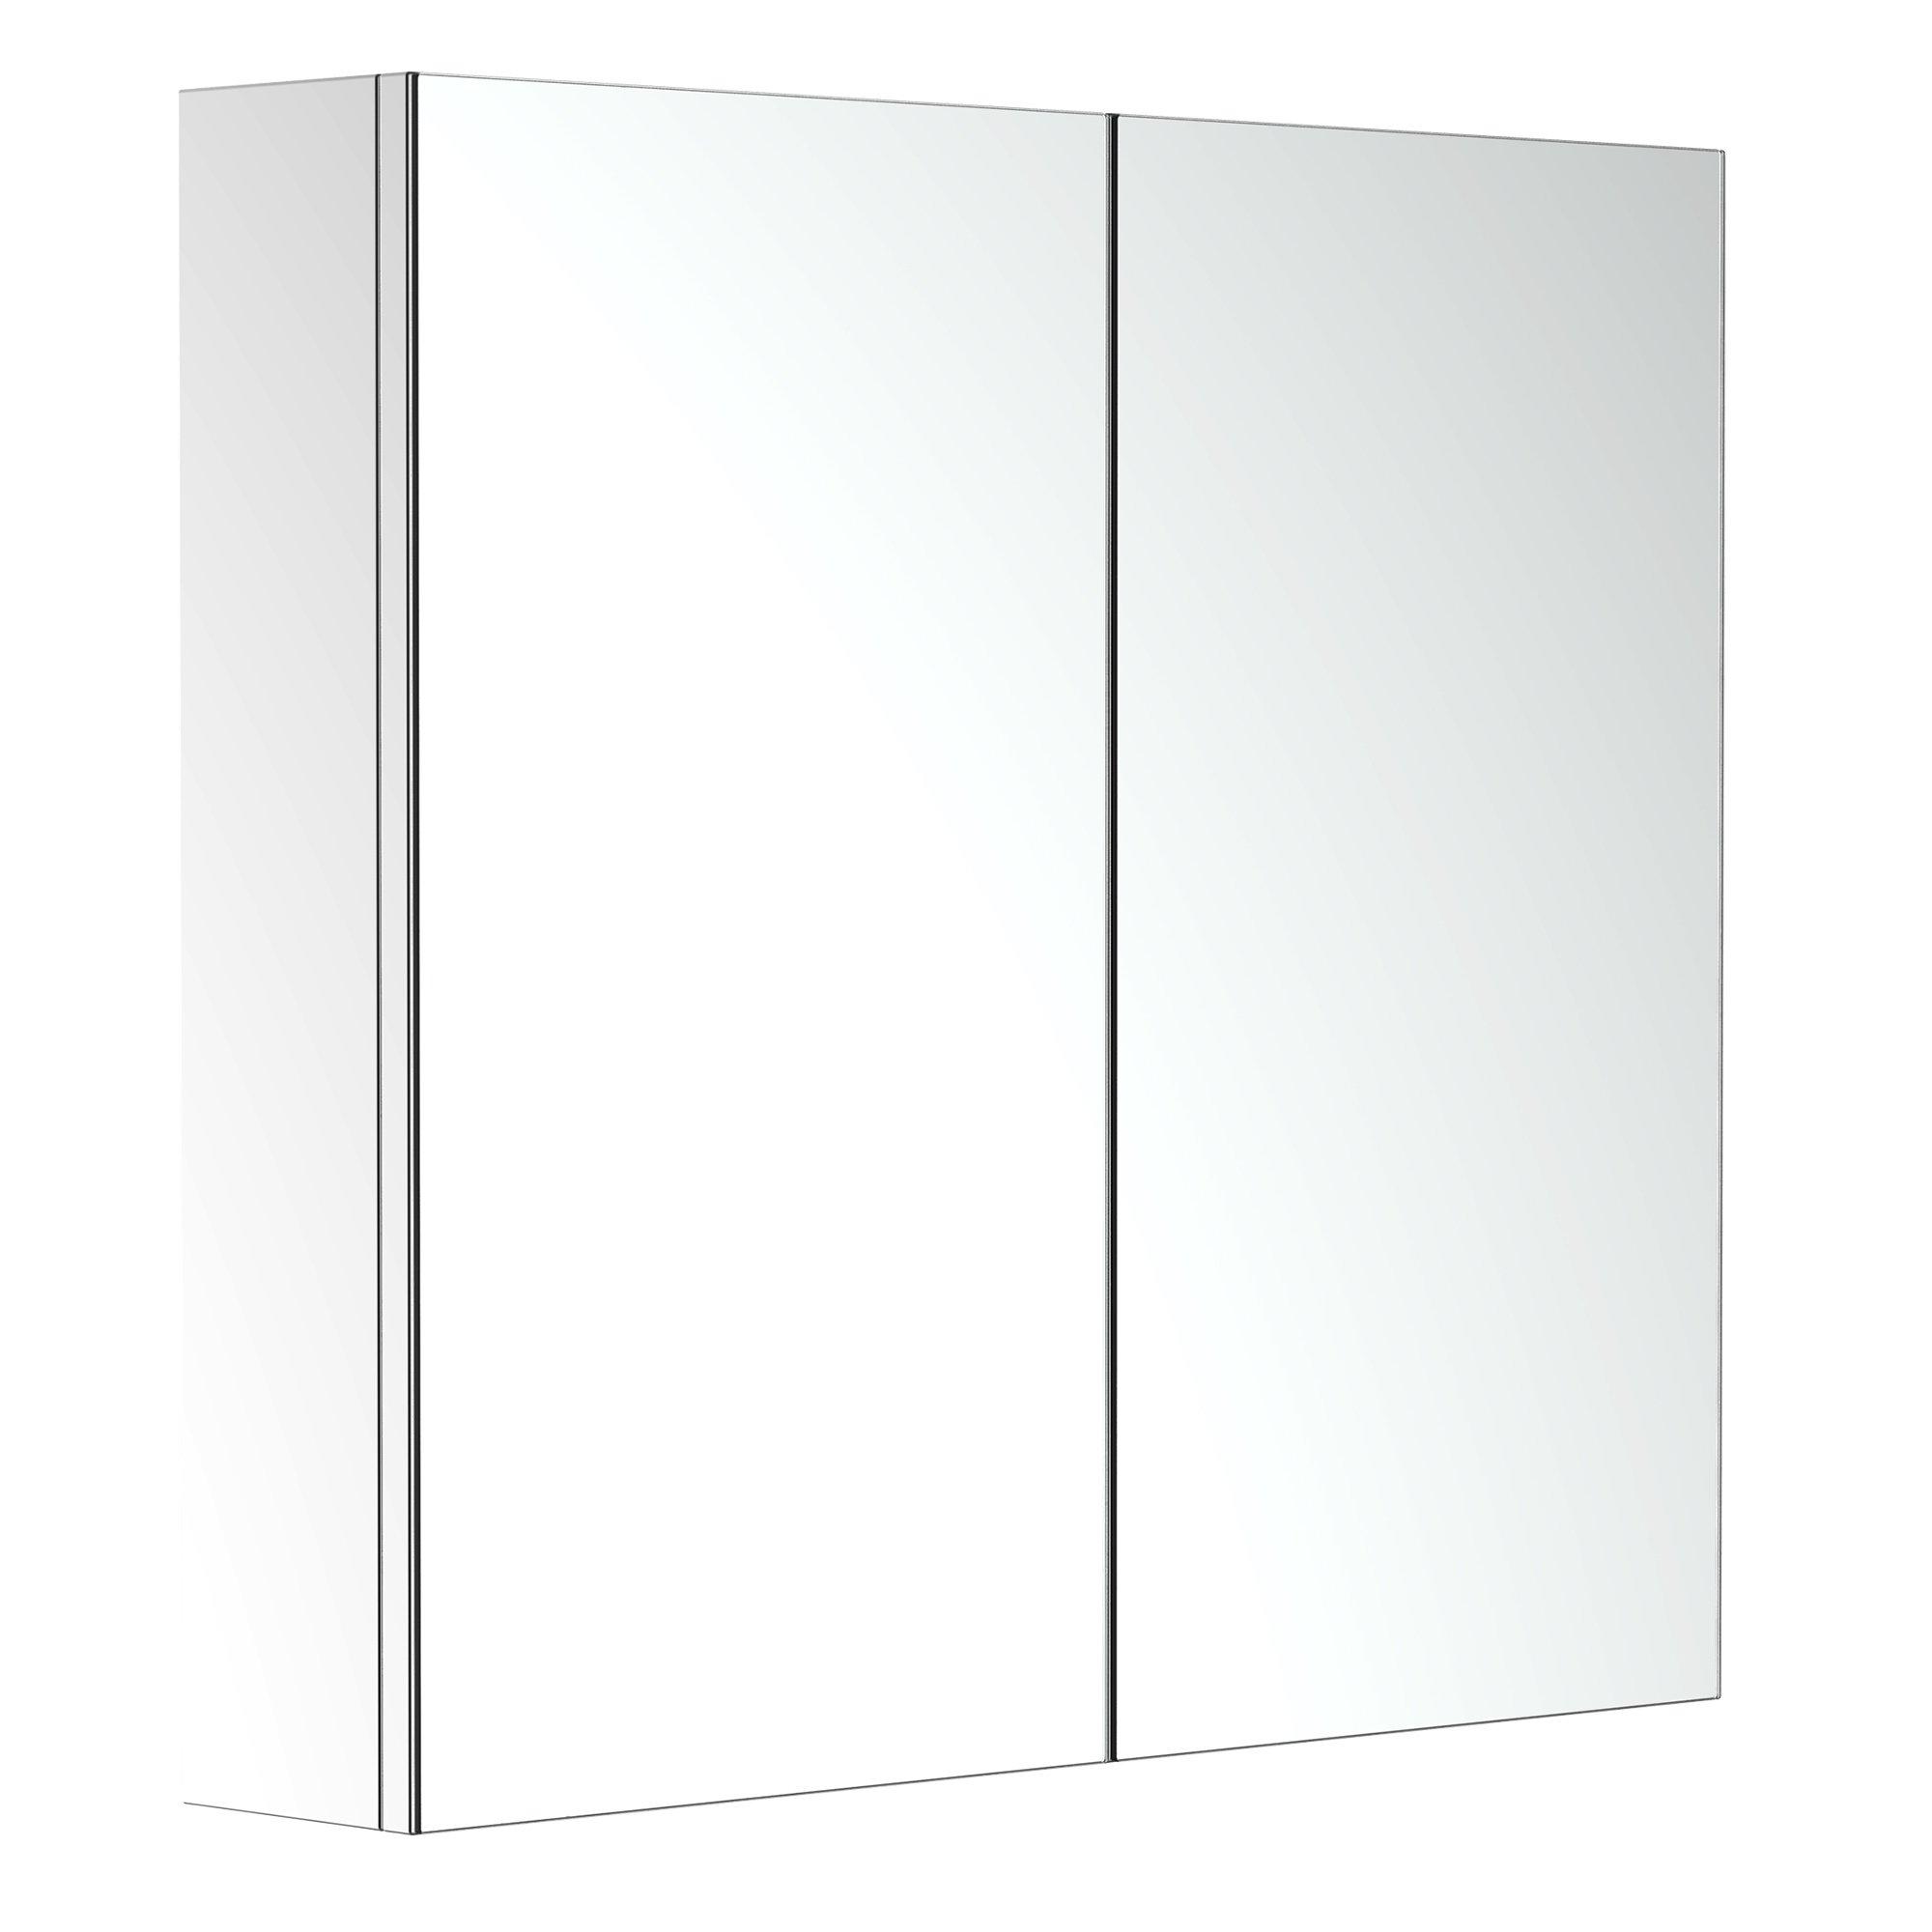 Bathroom Mirror Cabinet, Stainless Steel Wall Mounted  Storage